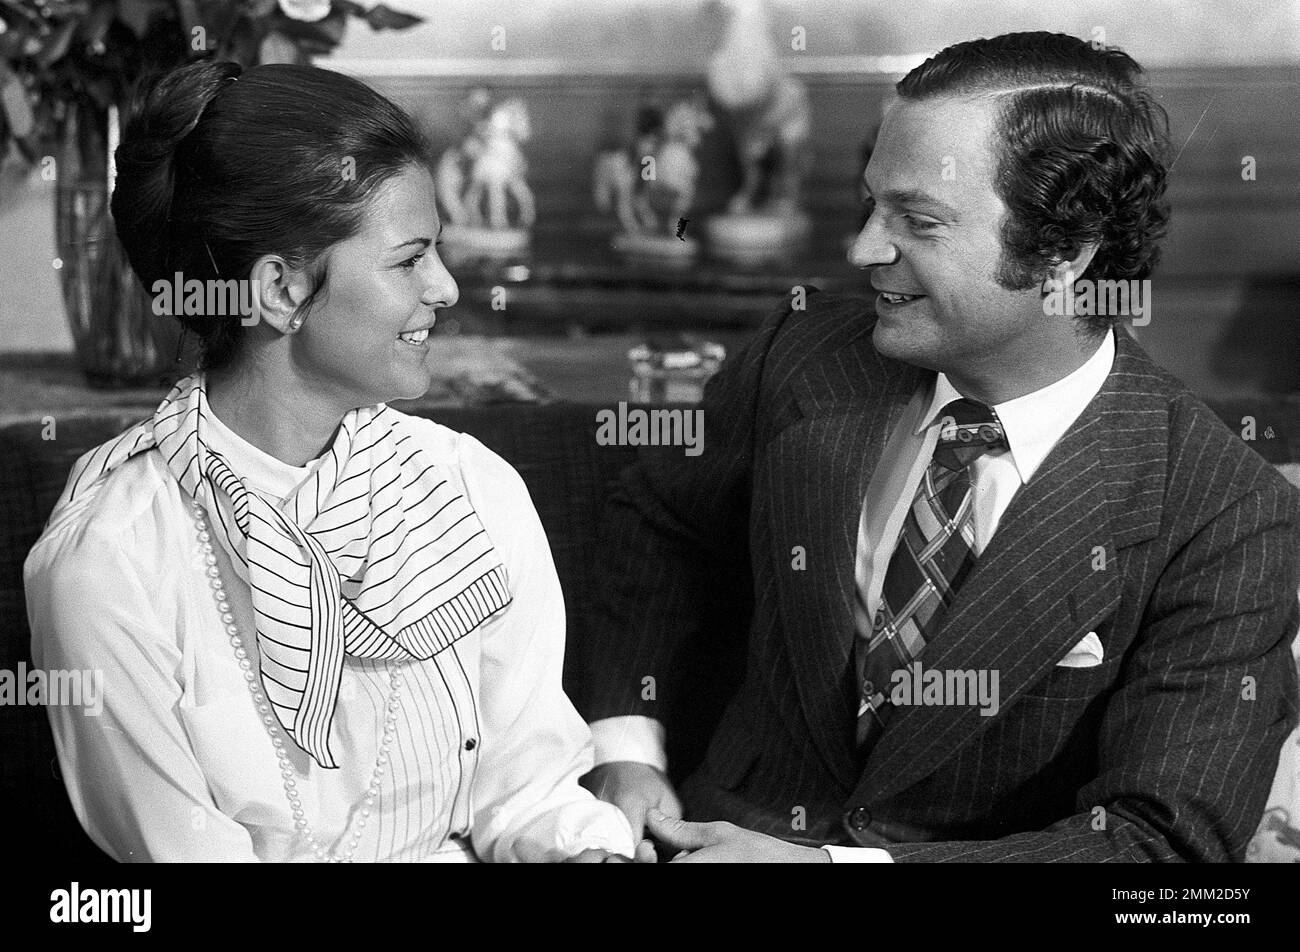 The engagement between King Carl Gustaf and Silvia Renate Sommerlath was announced on 12 March 1976 at the Royal Palace. The King and Silvia on the green engagement couch in Sibylla's floor at Stockholm's Royal Palace on March 13, 1976, where they meet the Swedish media. Stock Photo